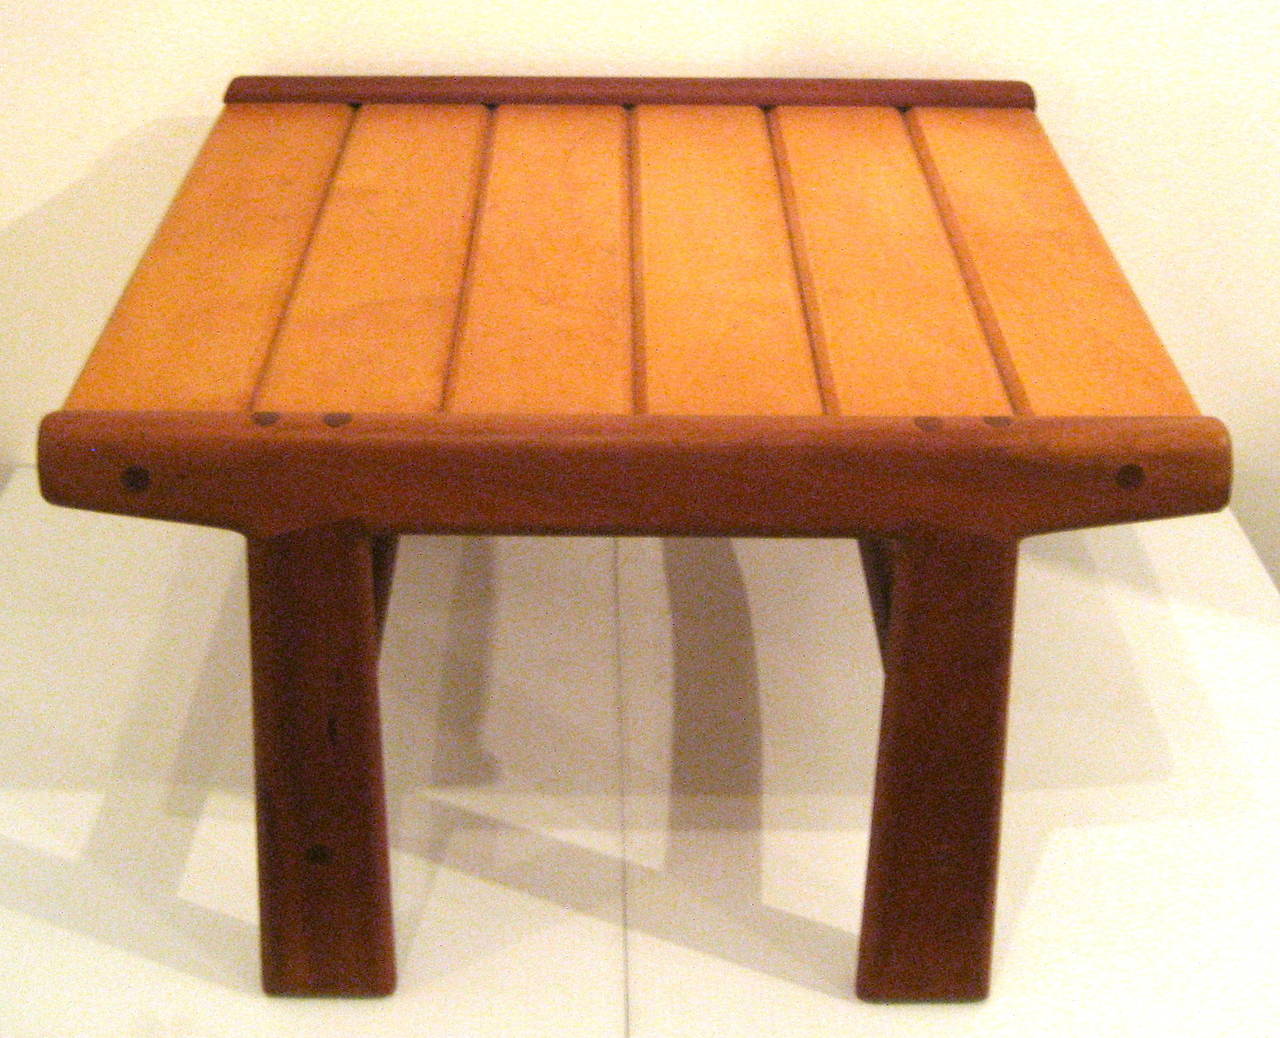 Great craftsmanship on this solid teak and beechwood combination, low stool solid and sturdy no nails used circa 1950s from Japan.